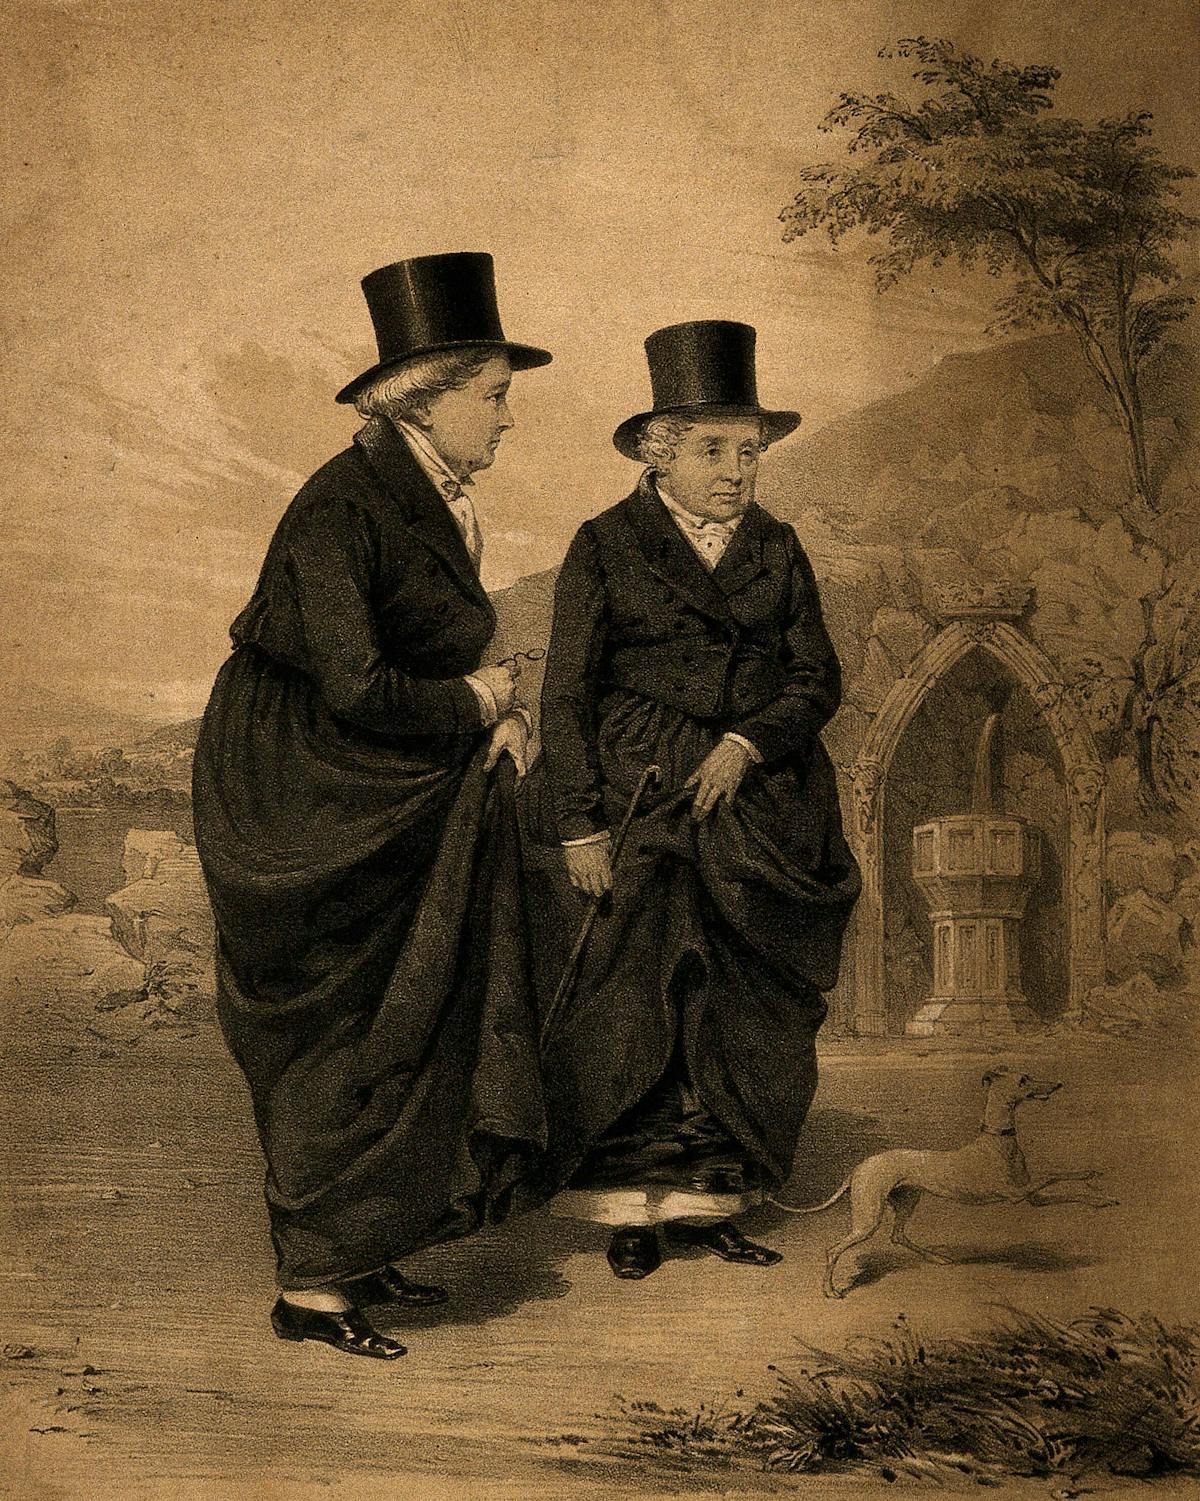 Etching showing 2 ladies in black overcoats and top hats standing together outside in a country scene. One holds a cane and the other a pair of spectacles. at their feet is a small dog, mid jump. Behind them are trees, rocks and carved stone fountain.